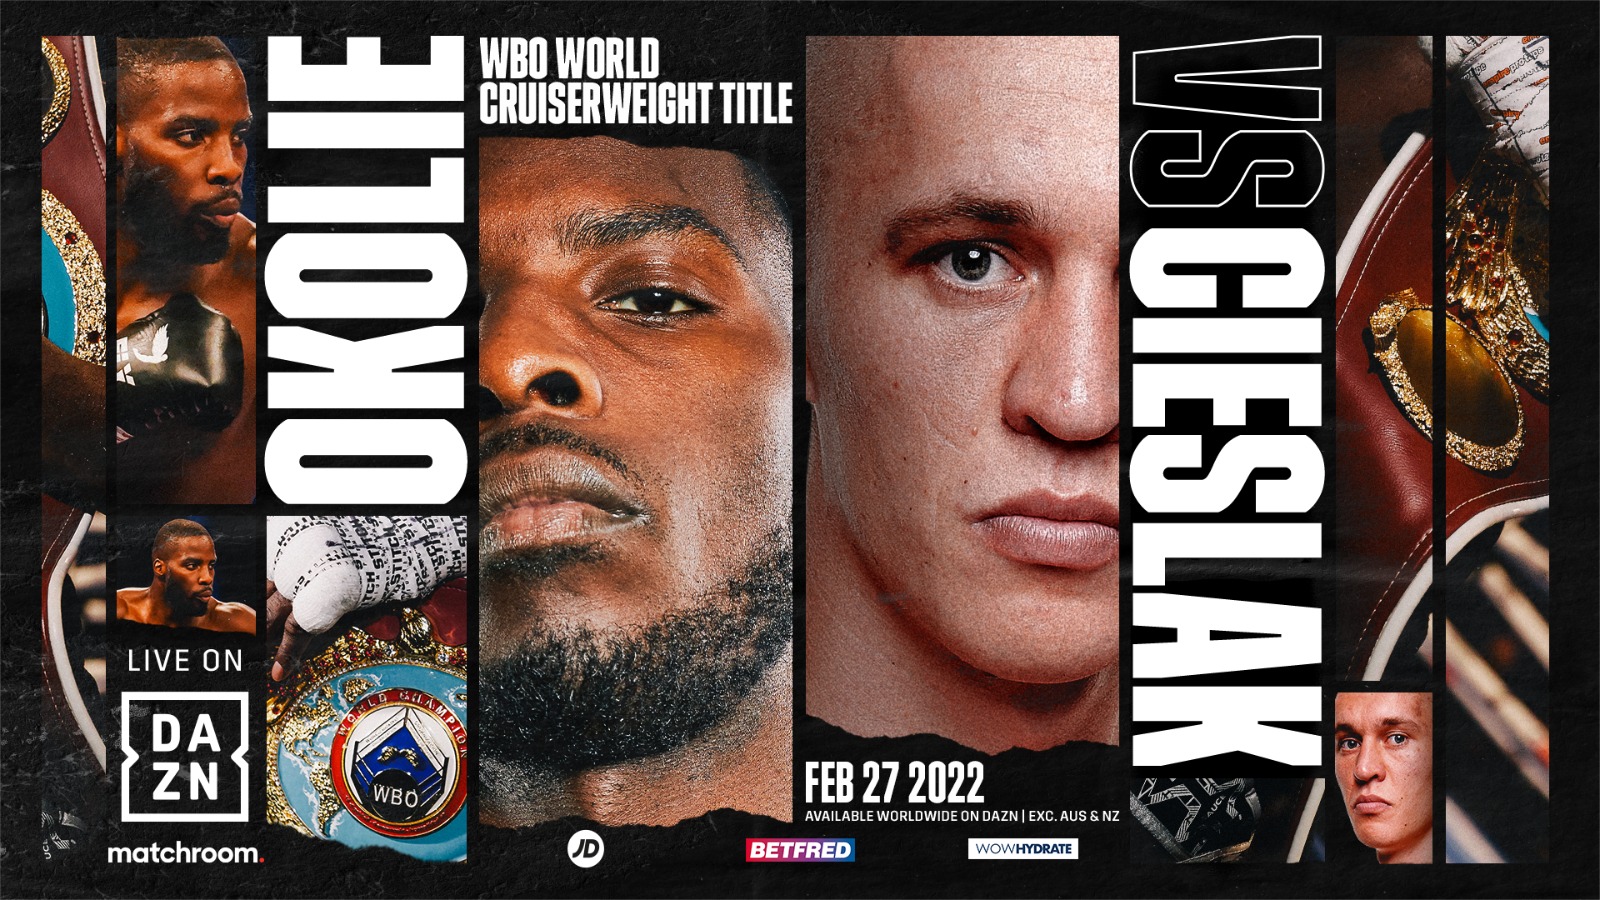 Image: Lawrence Okolie faces Michal Cieslak on February 27th at the 02